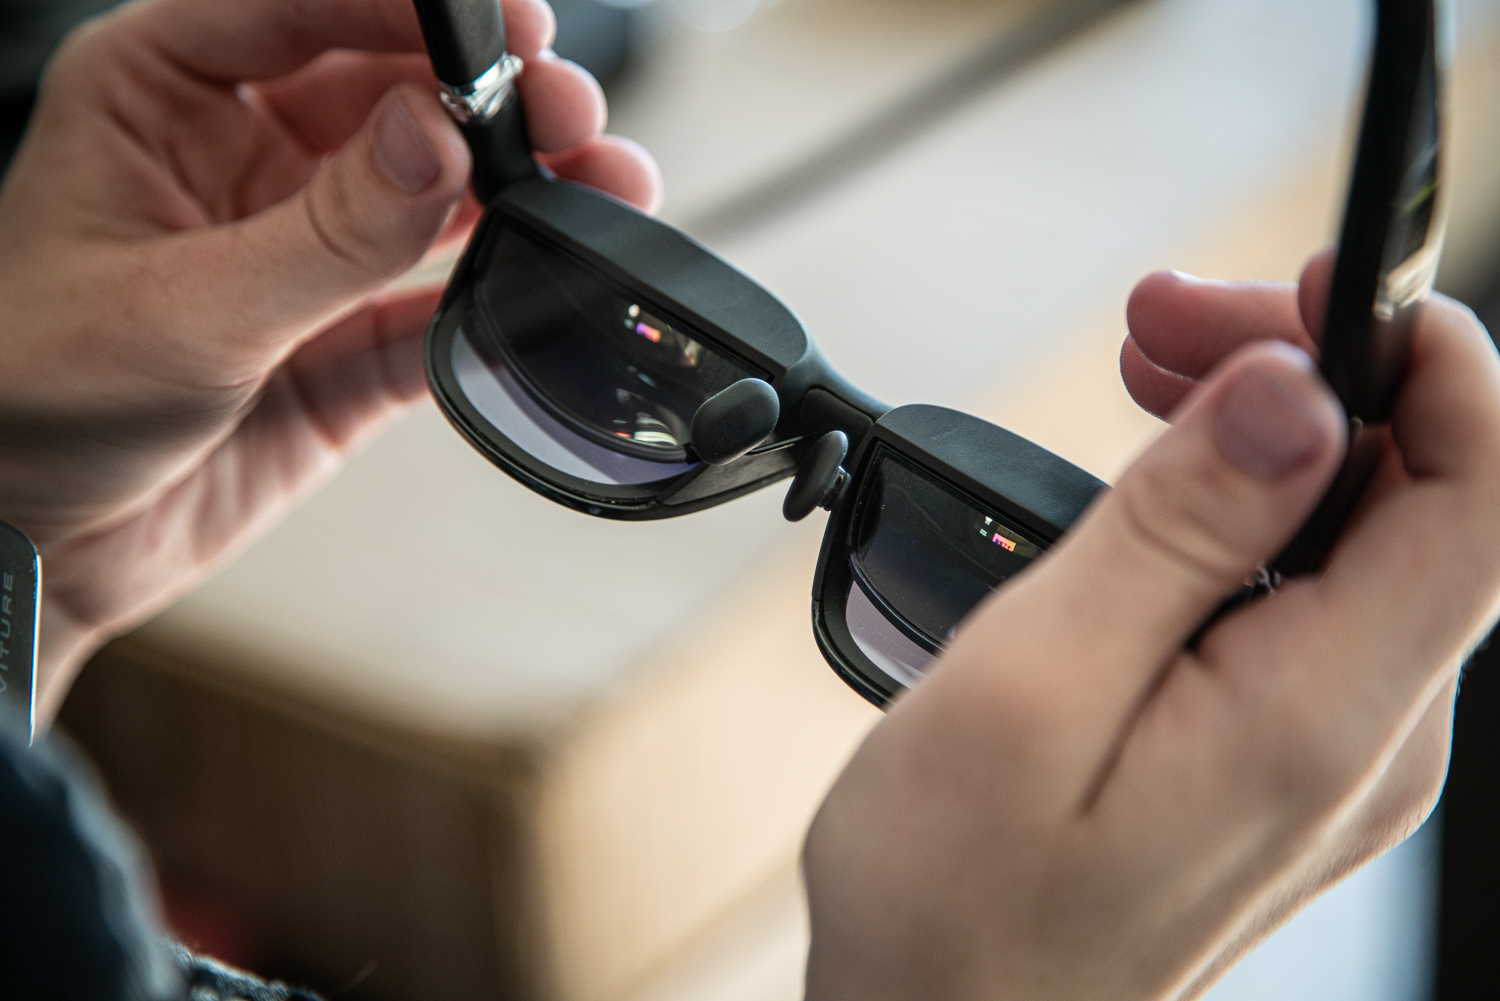 These prototype XR glasses sold me on mixed reality gaming